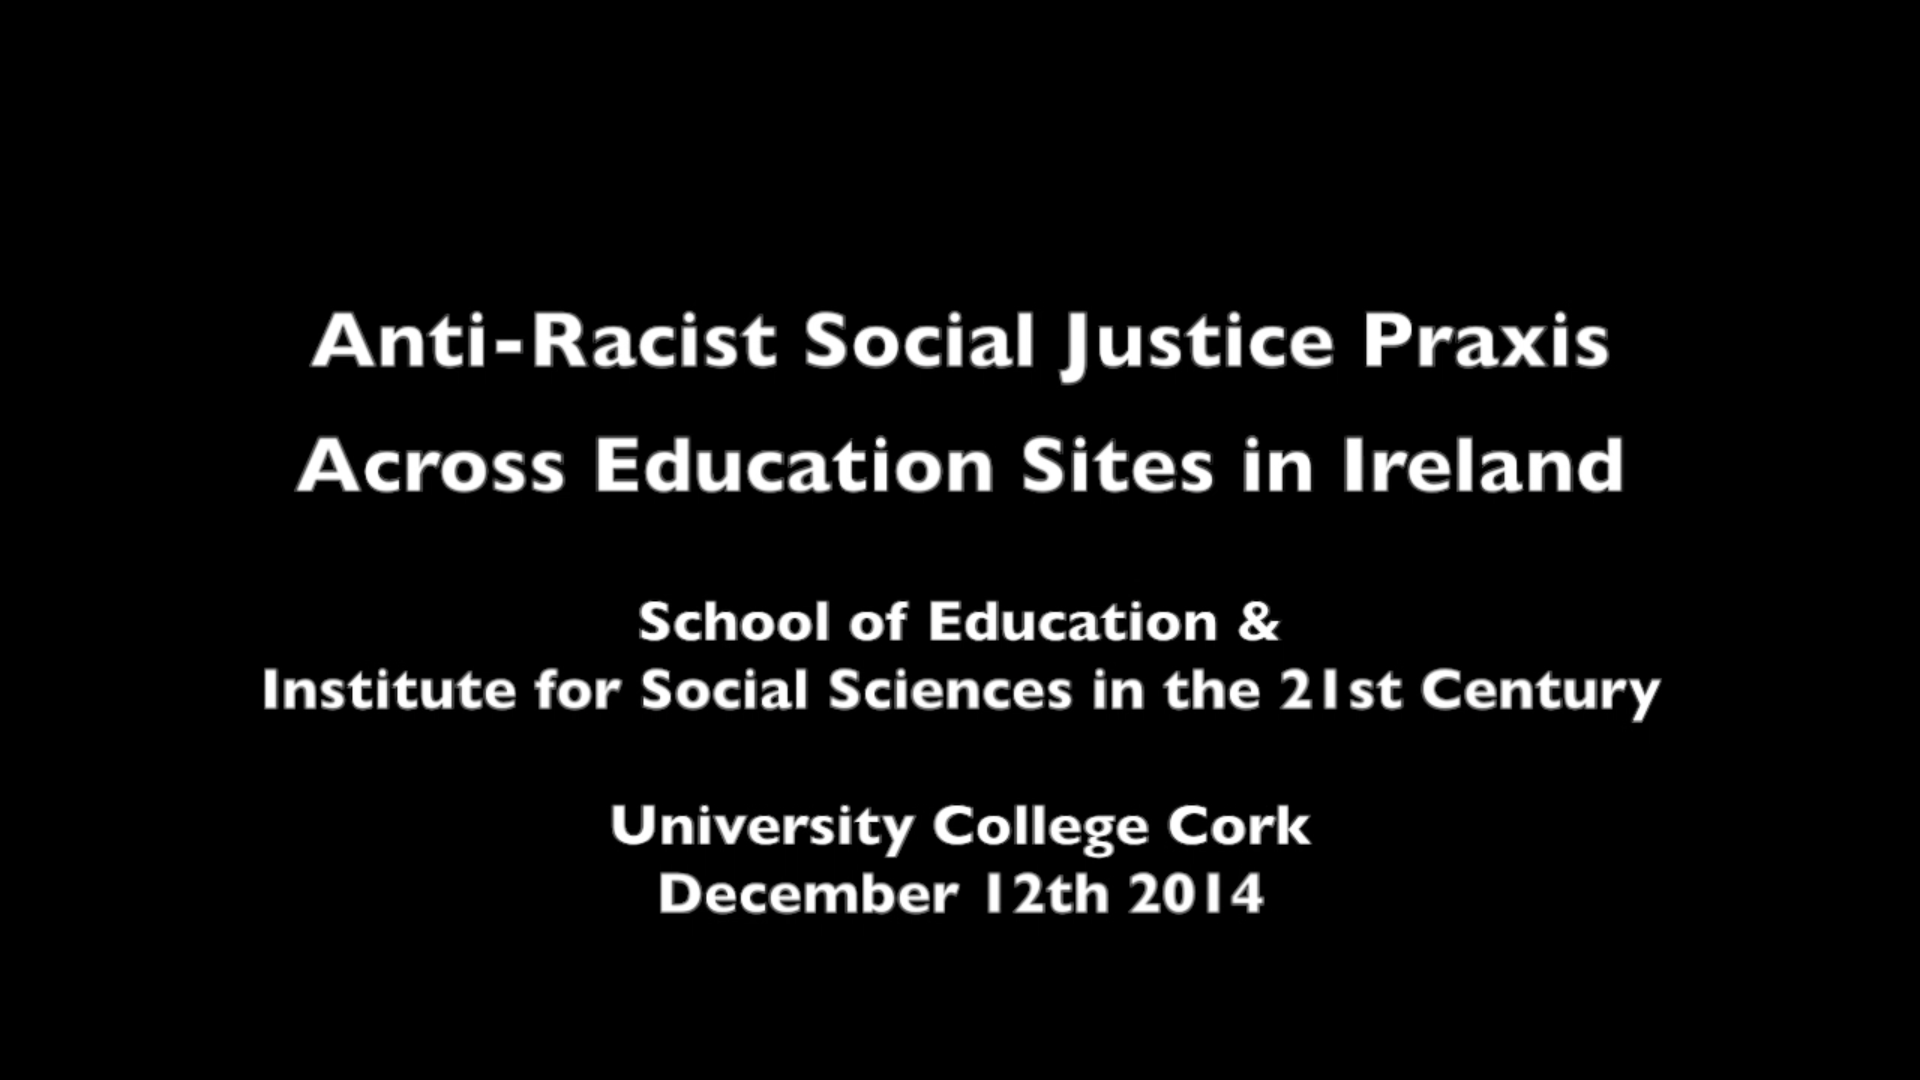 Video of Anti-Racist Social Justice Praxis now available